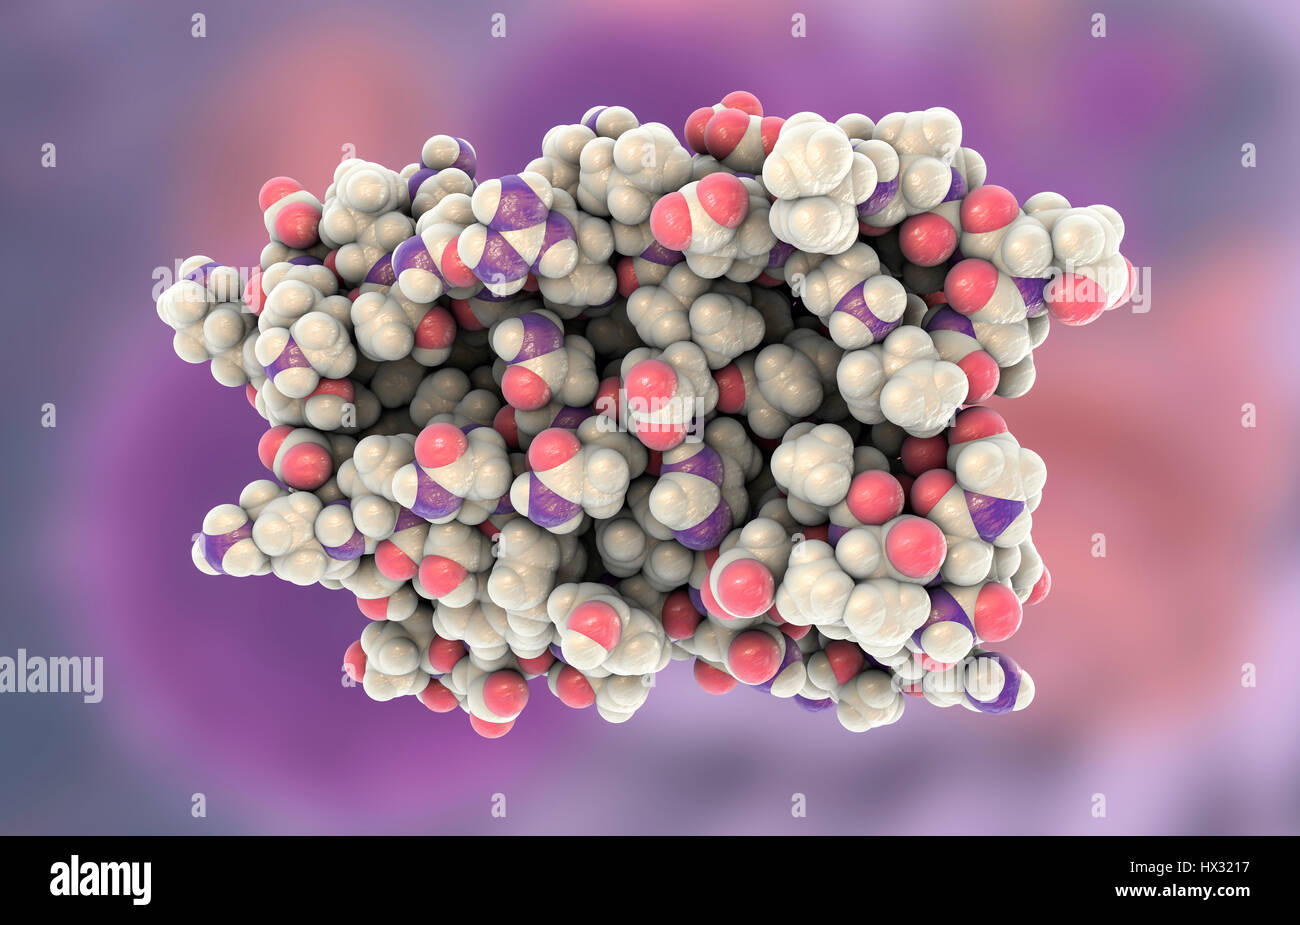 Human interferon alpha, molecular model. Interferons are proteins produced by white blood cells as part of the immune response to invading pathogens, especially viruses. Stock Photo